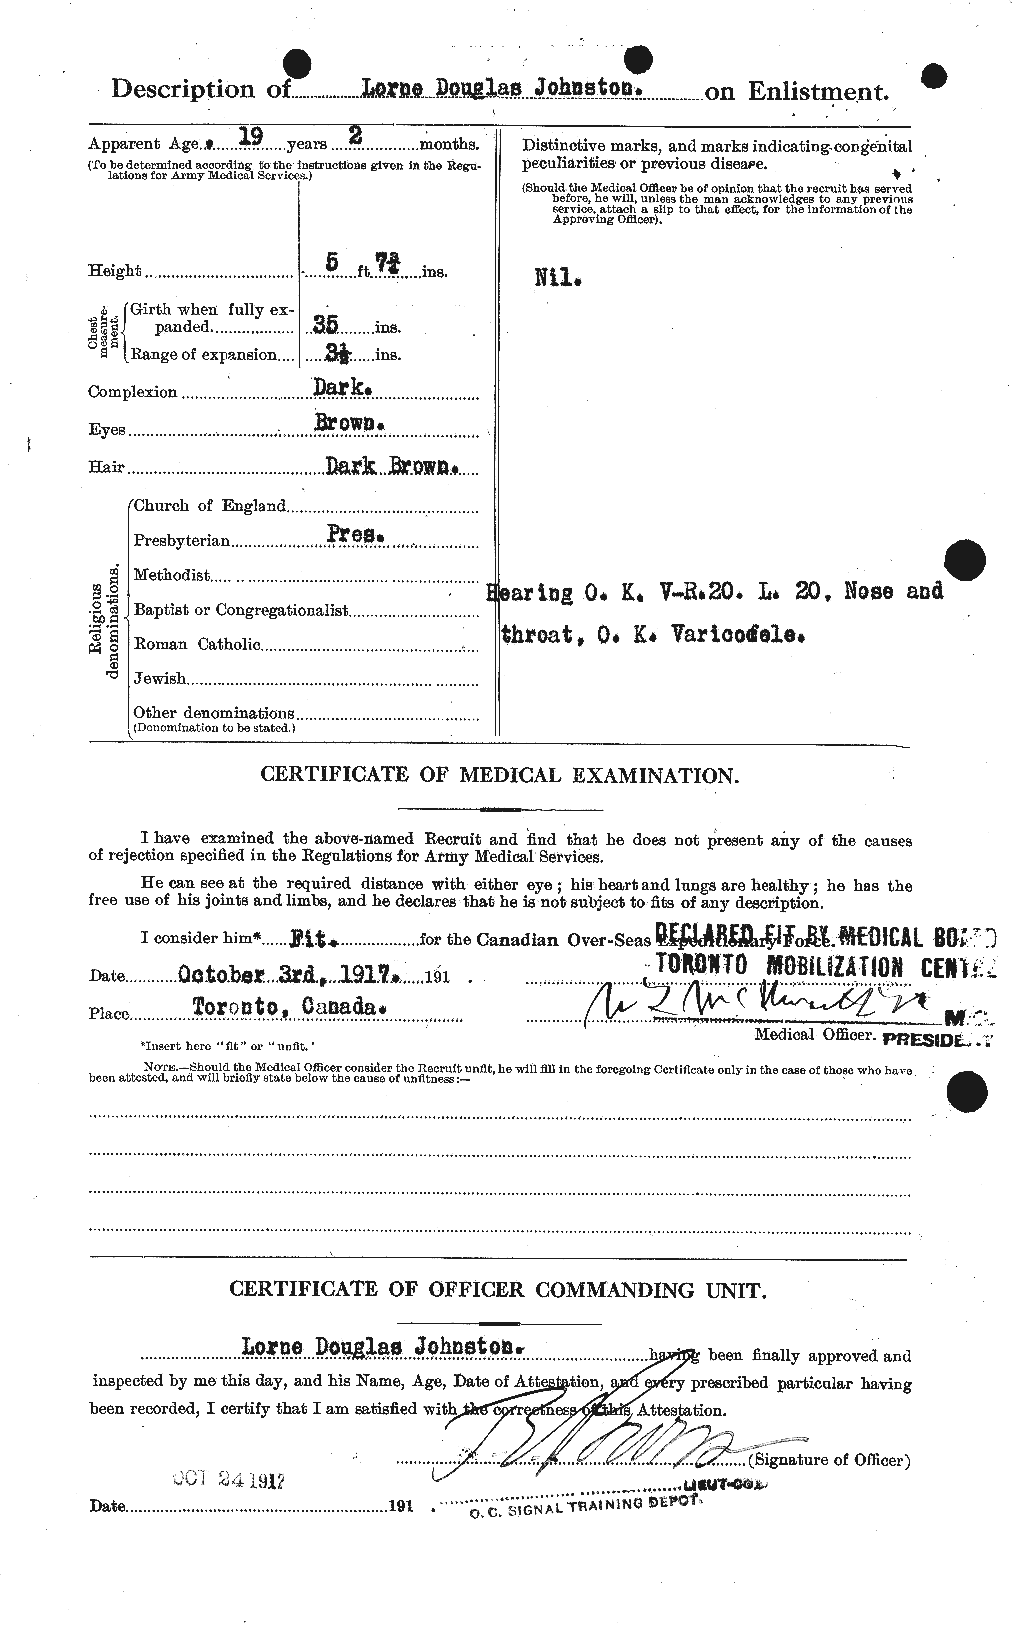 Personnel Records of the First World War - CEF 422957b